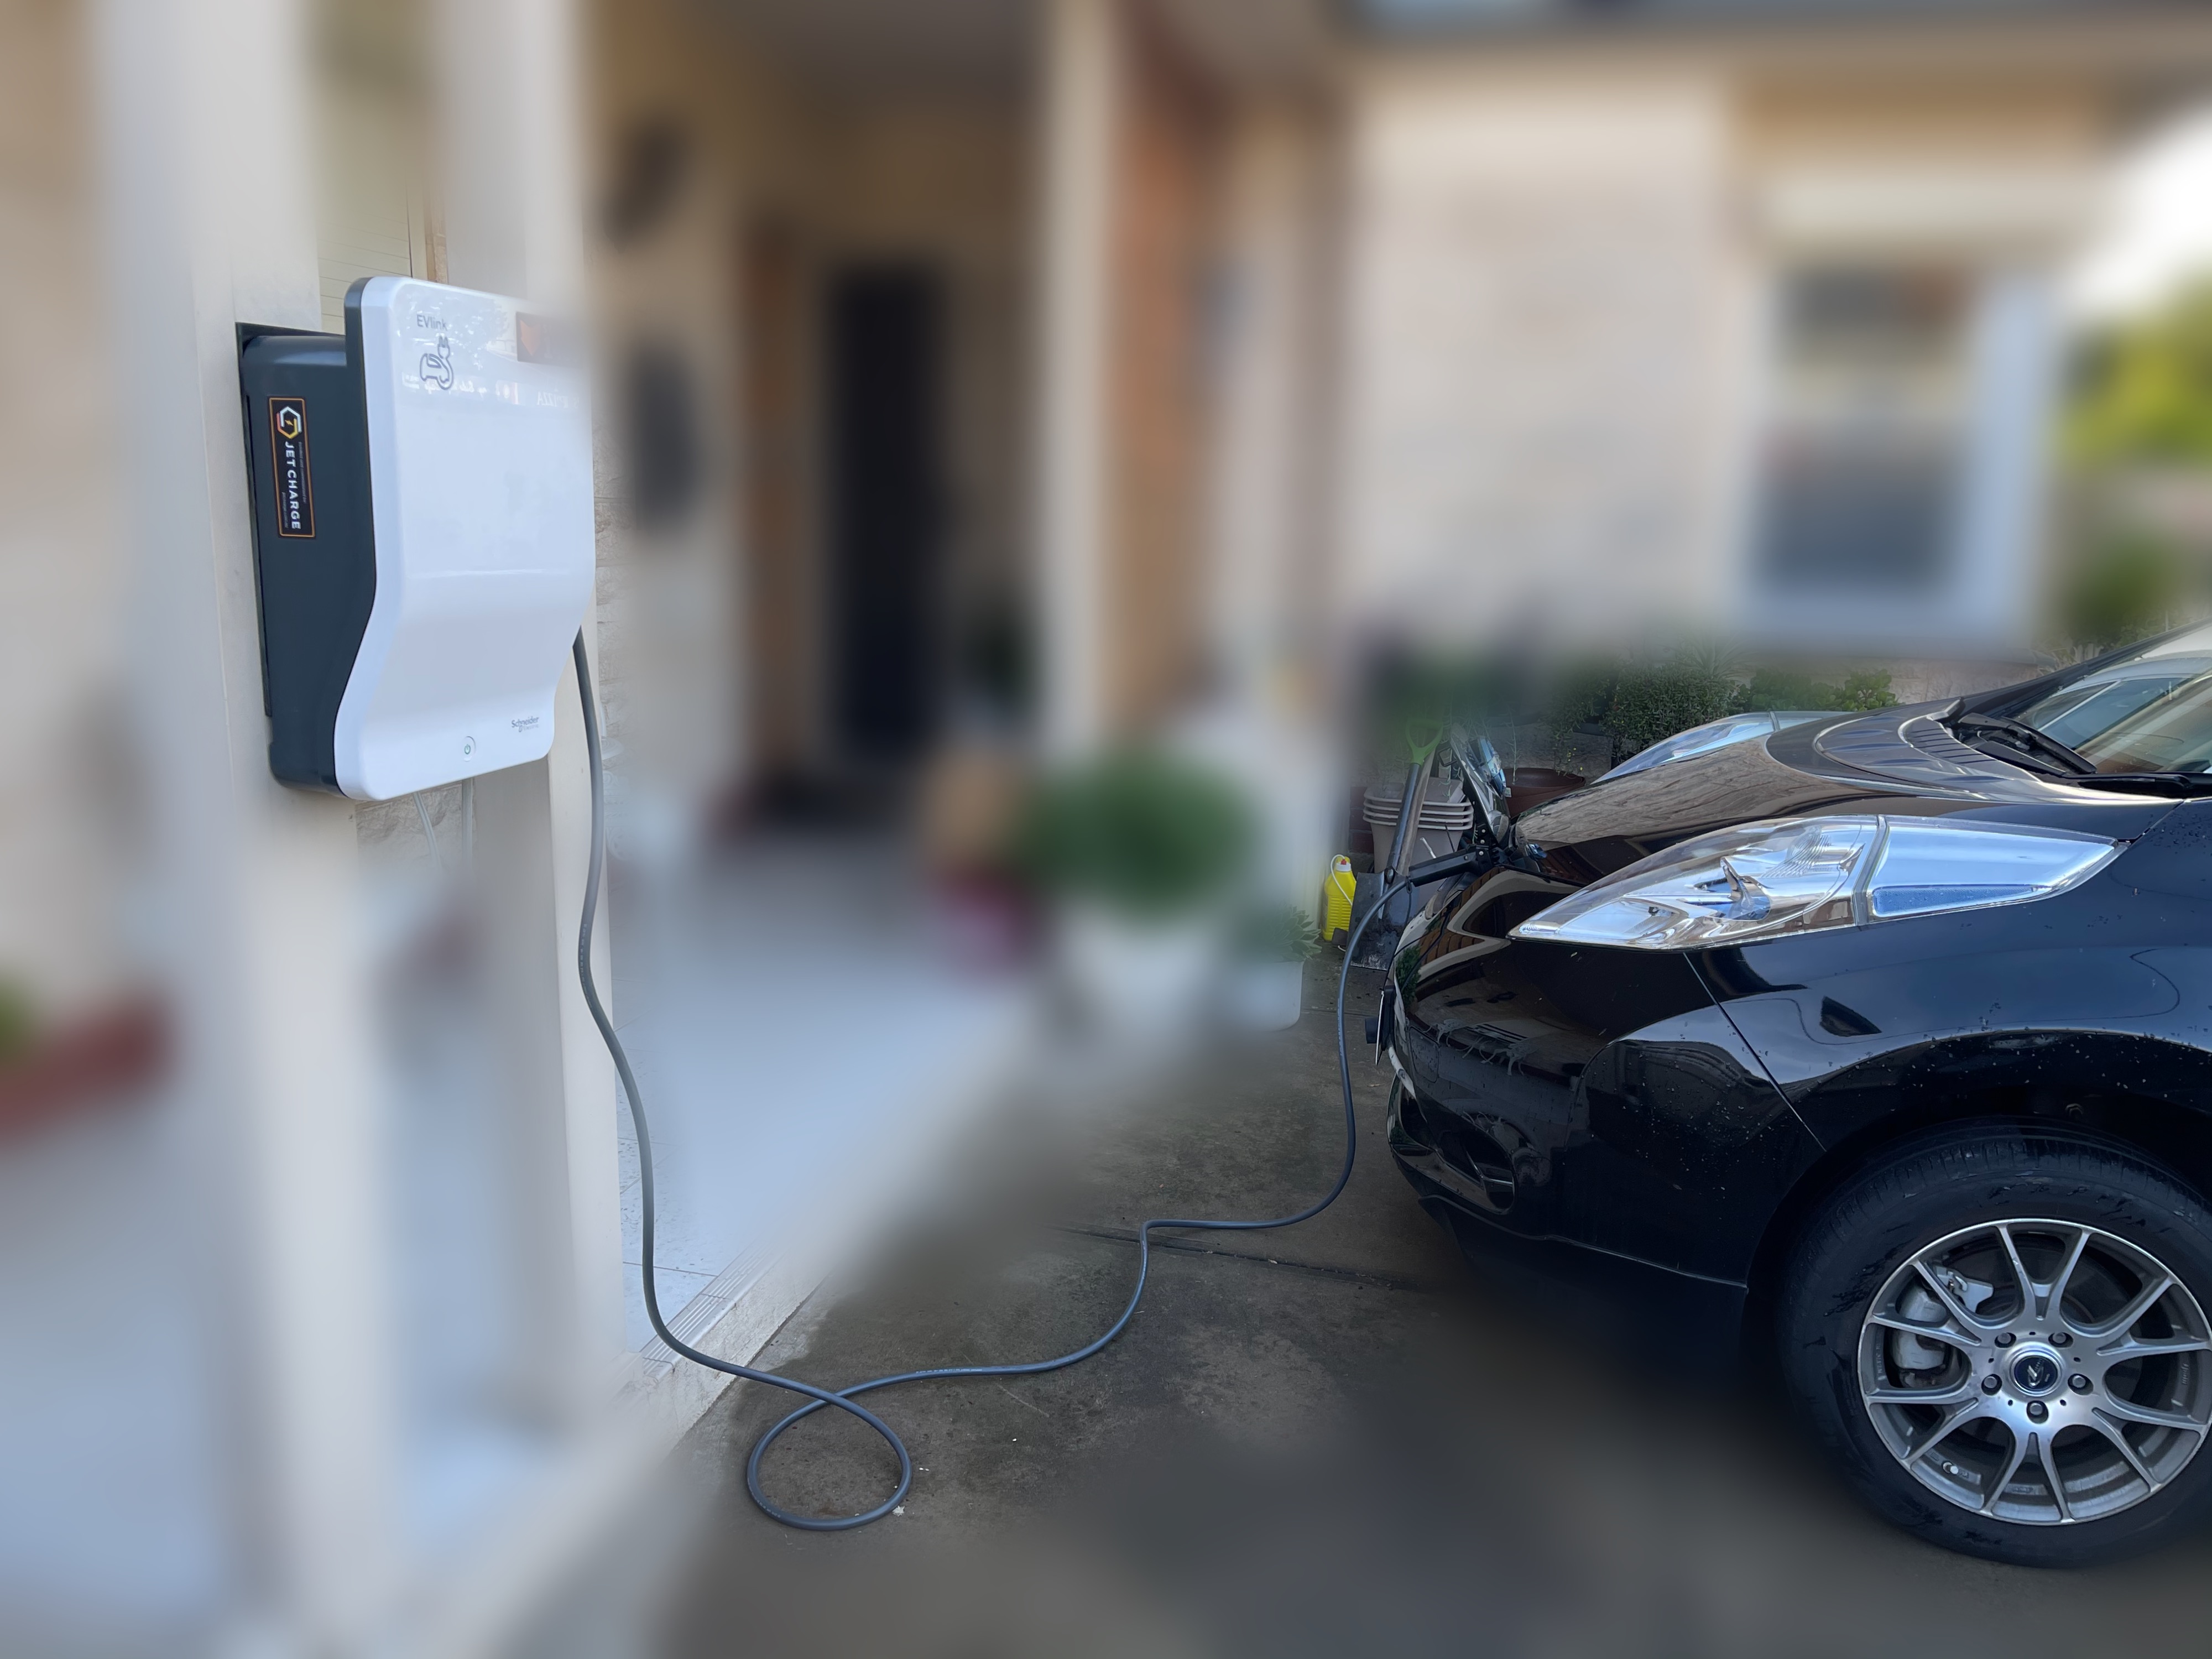 Electric Vehicle Smart Charging trial by AGL Next Neighbourhood AGL